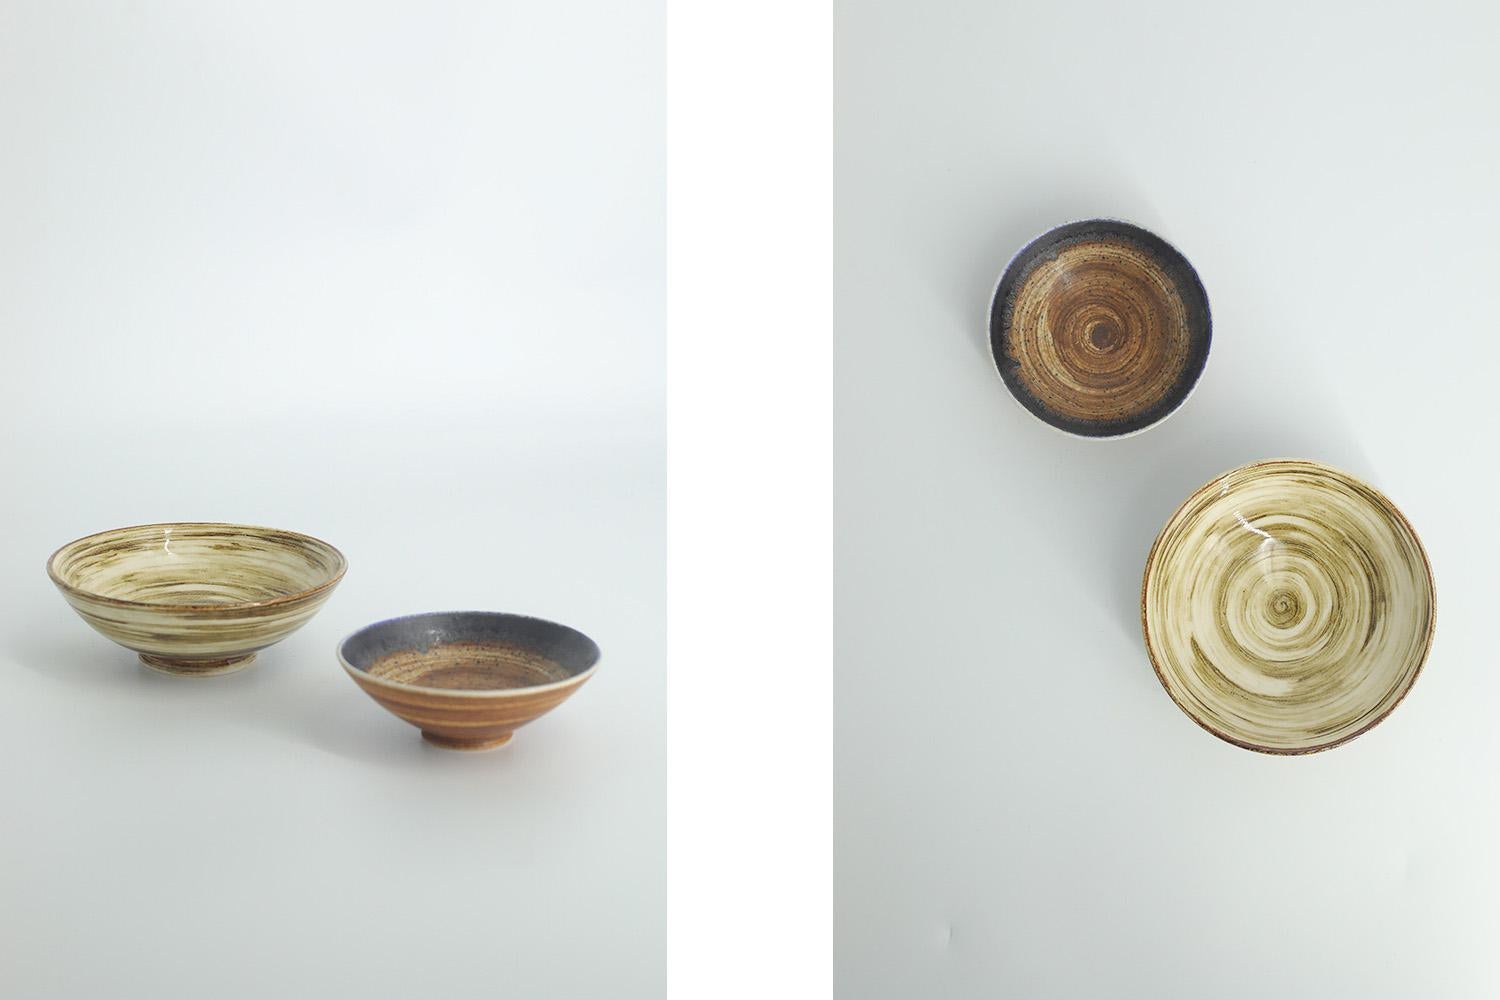 
1. Height 4 cm  Width 11 cm  Depth 11 cm
2. Height 3 cm  Width 9 cm  Depth 9 cm

This set of 2 miniature bowls was designed by Gunnar Borg for the Swedish manufacture Höganäs Keramik during the 1960s. Handmade by the Master, with the utmost care